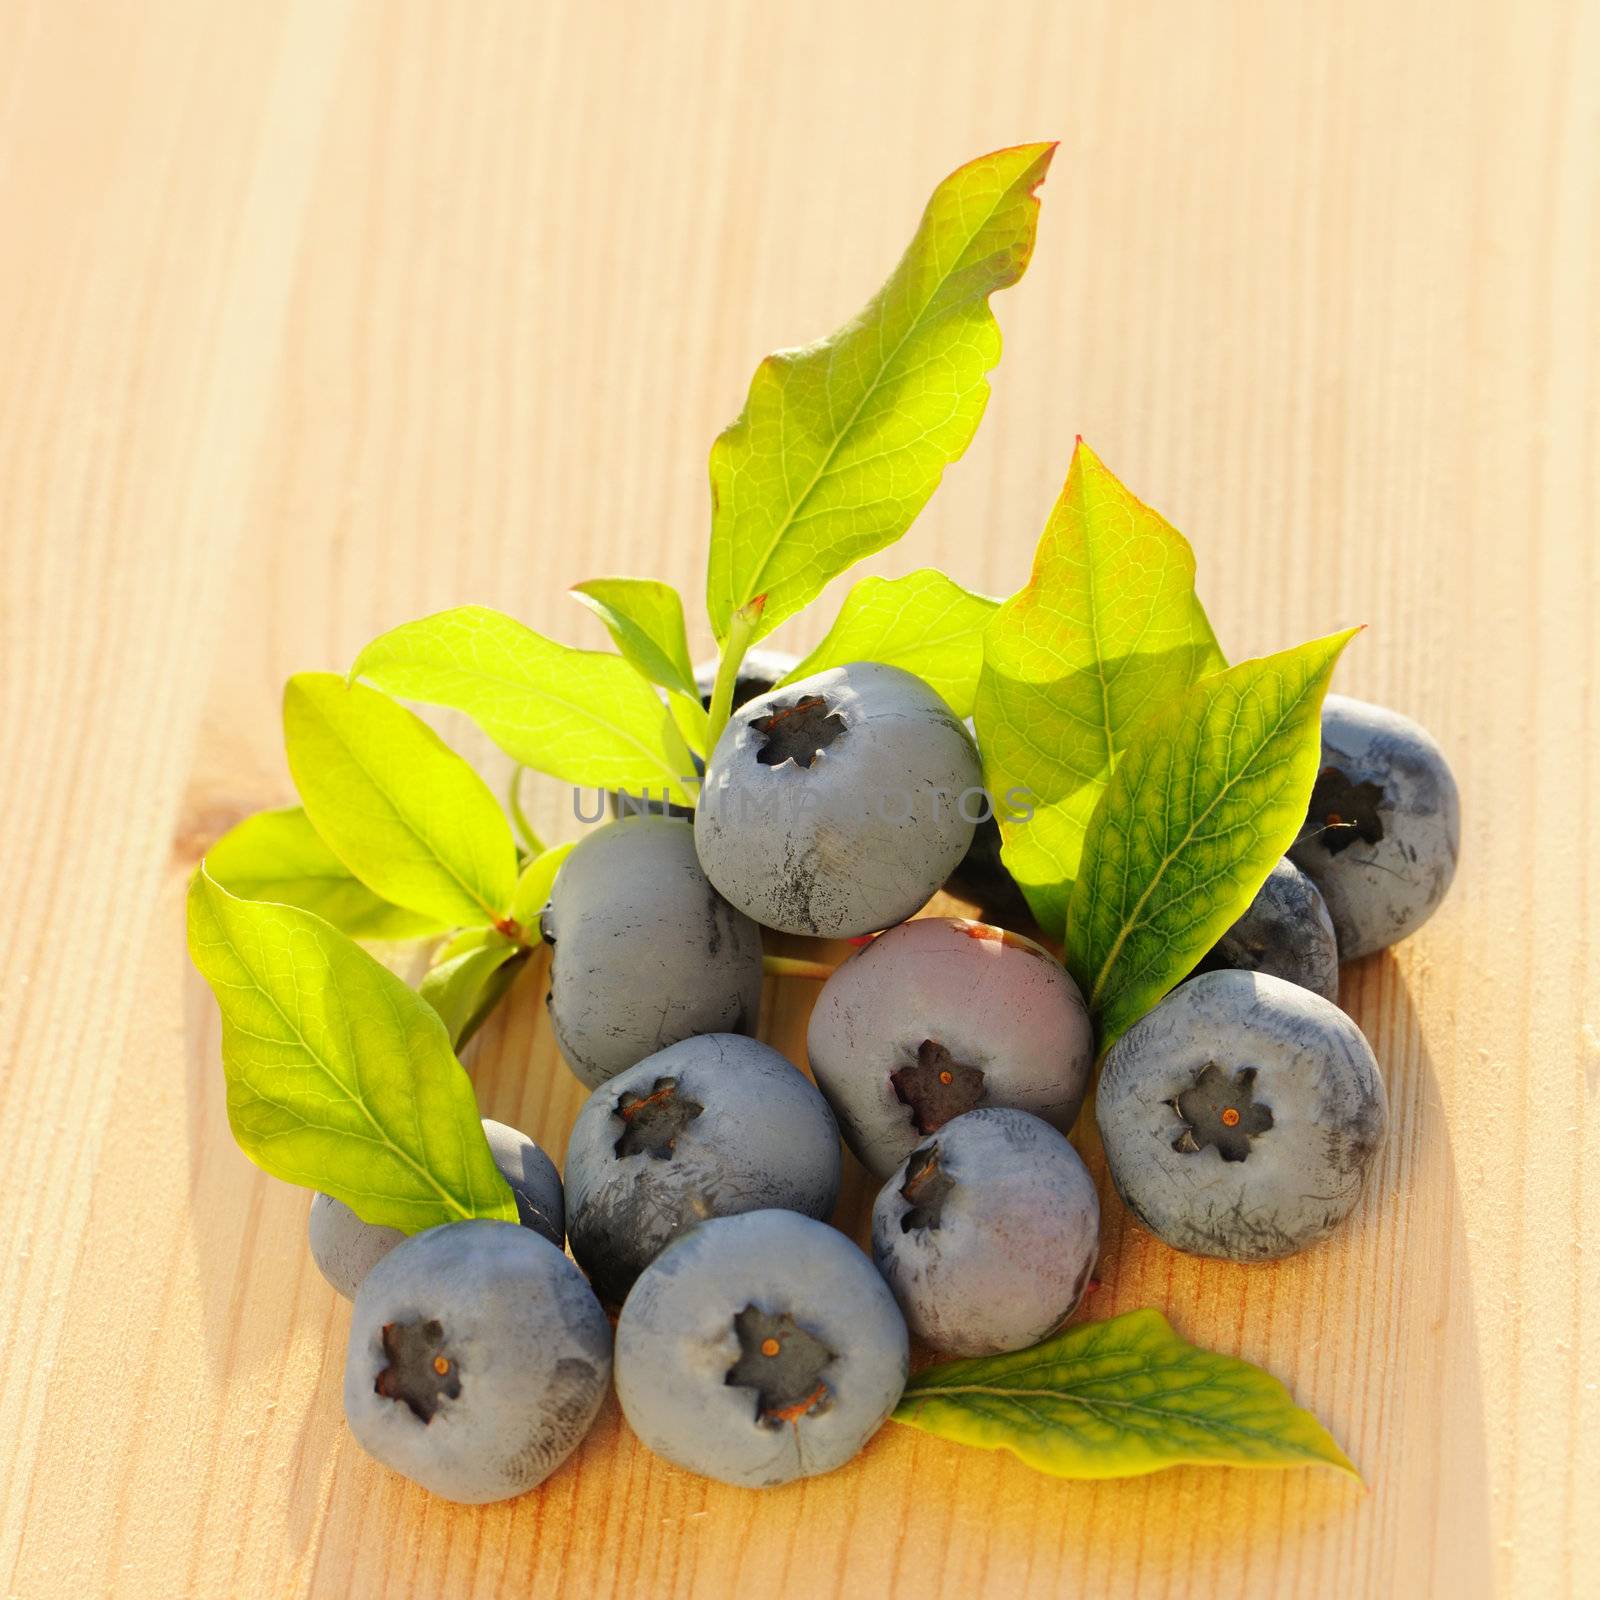 Blueberry on wooden table by haveseen